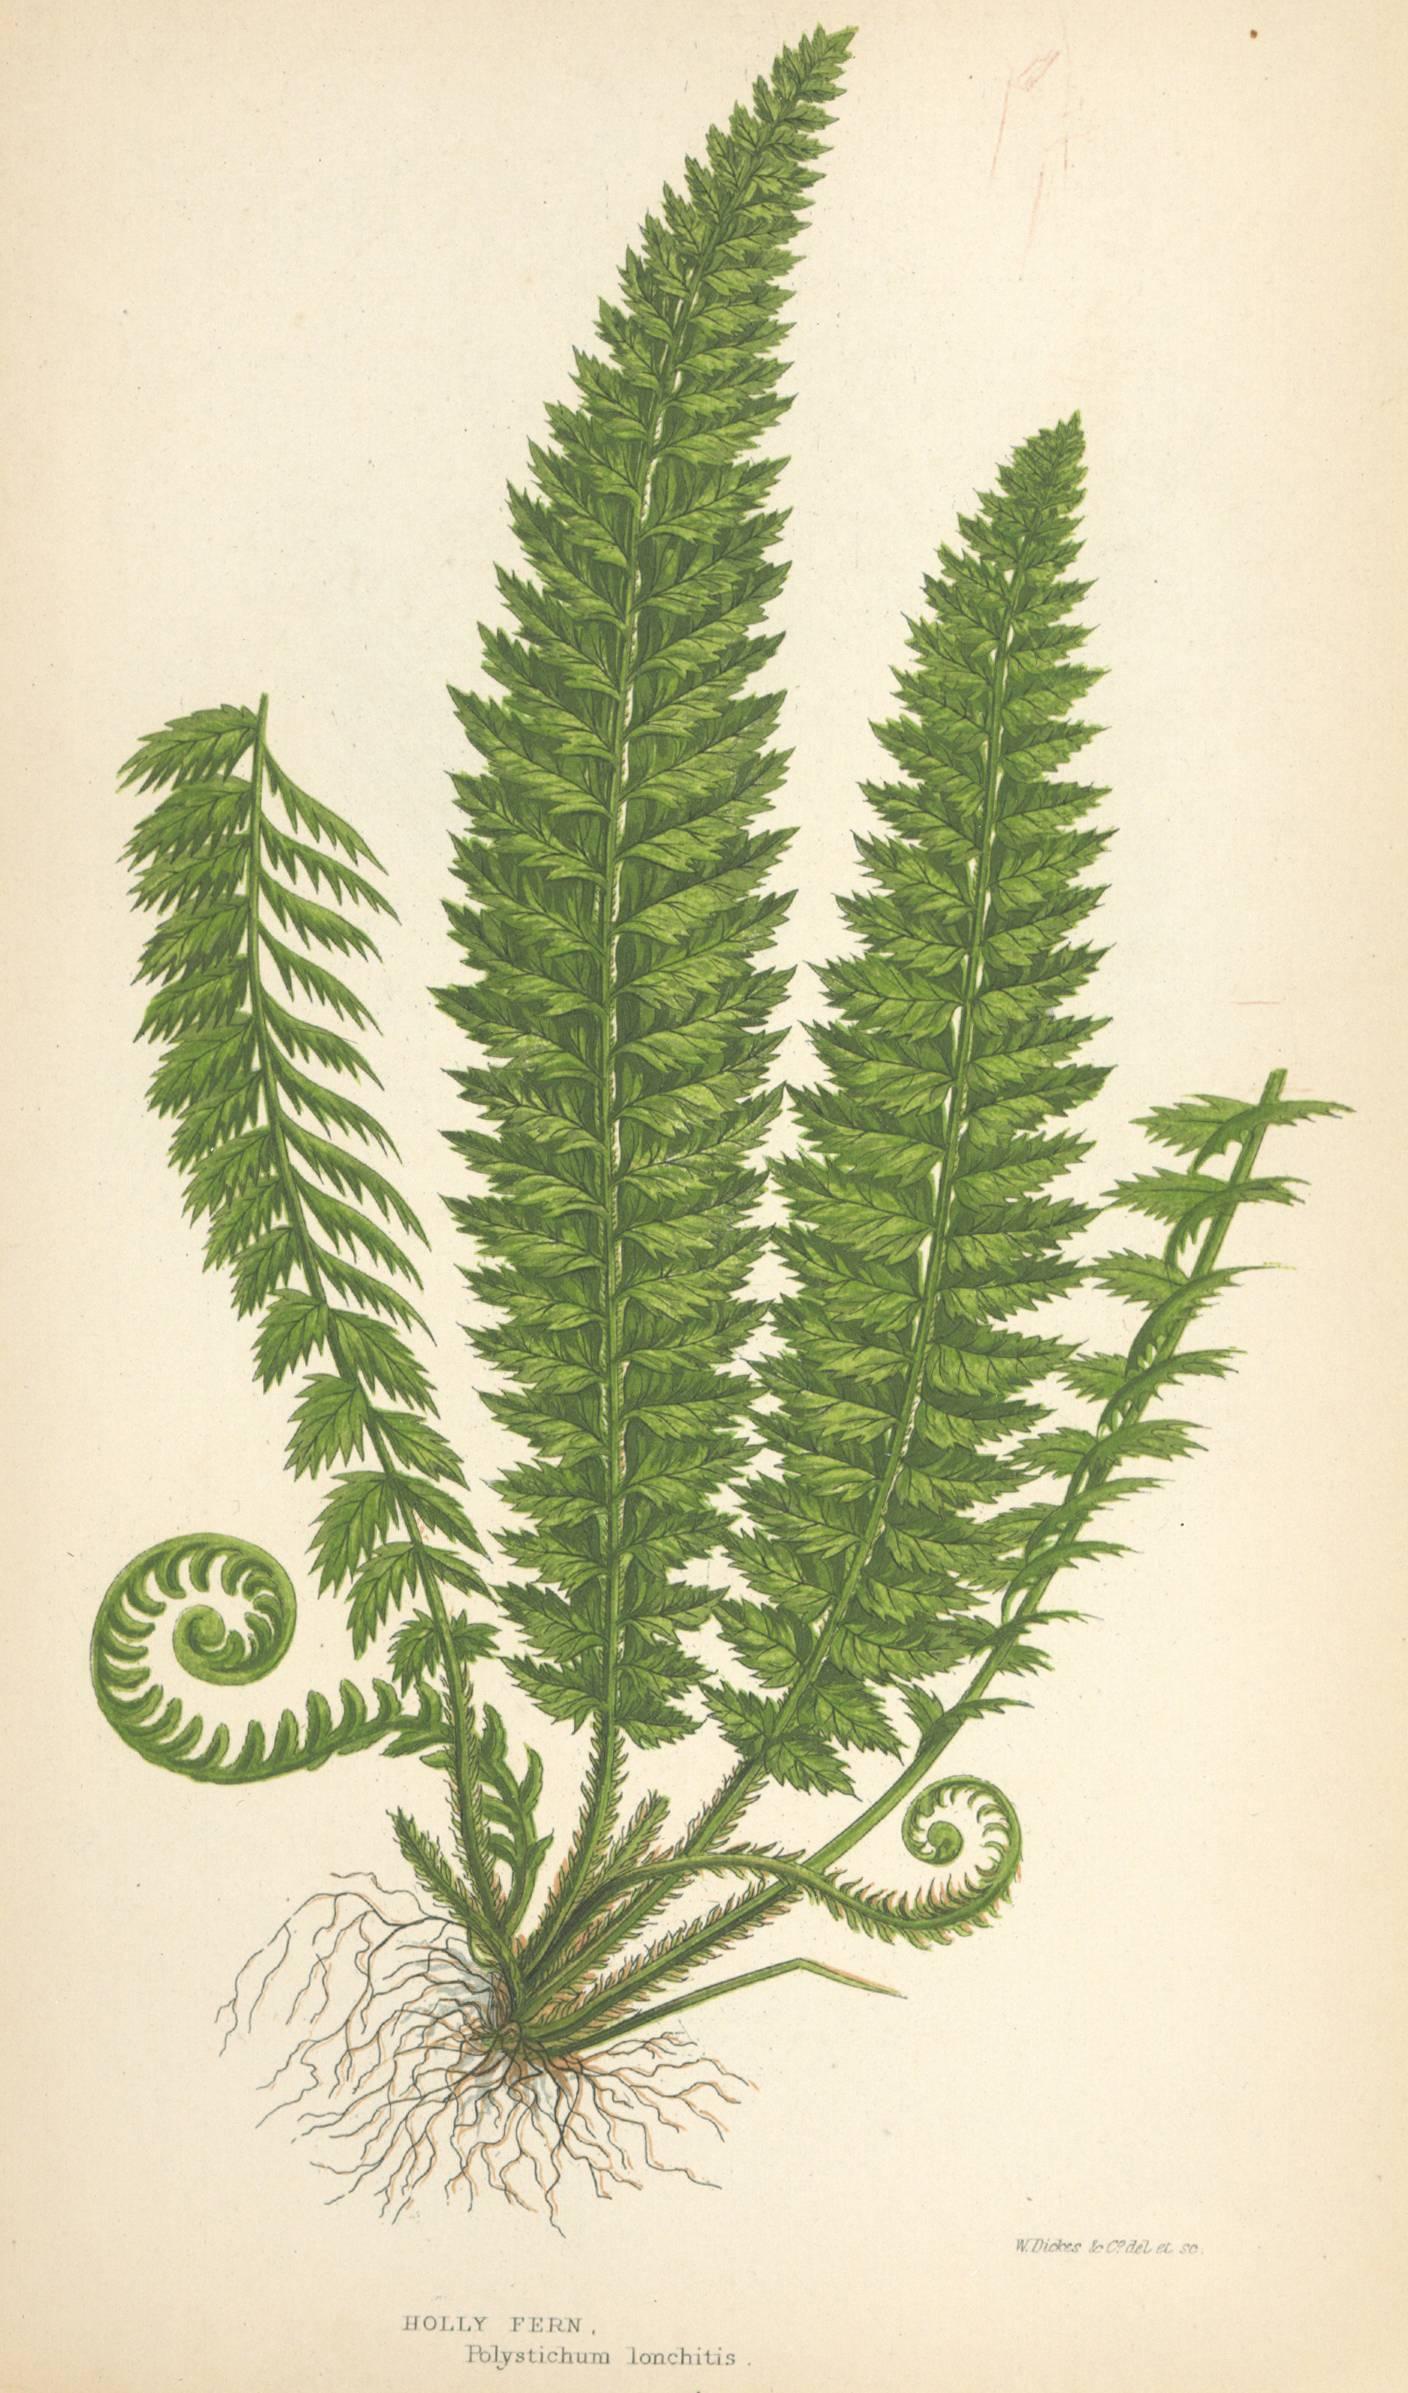 Mountain Fern (Lastrea oeropetris) and Holly Fern (Polystichum lonchitis) chromolithographs of from the classic botanical text "Our Native Ferns, or History of the British Species and Varieties" by E.J. Lowe, 1867. Framed with an